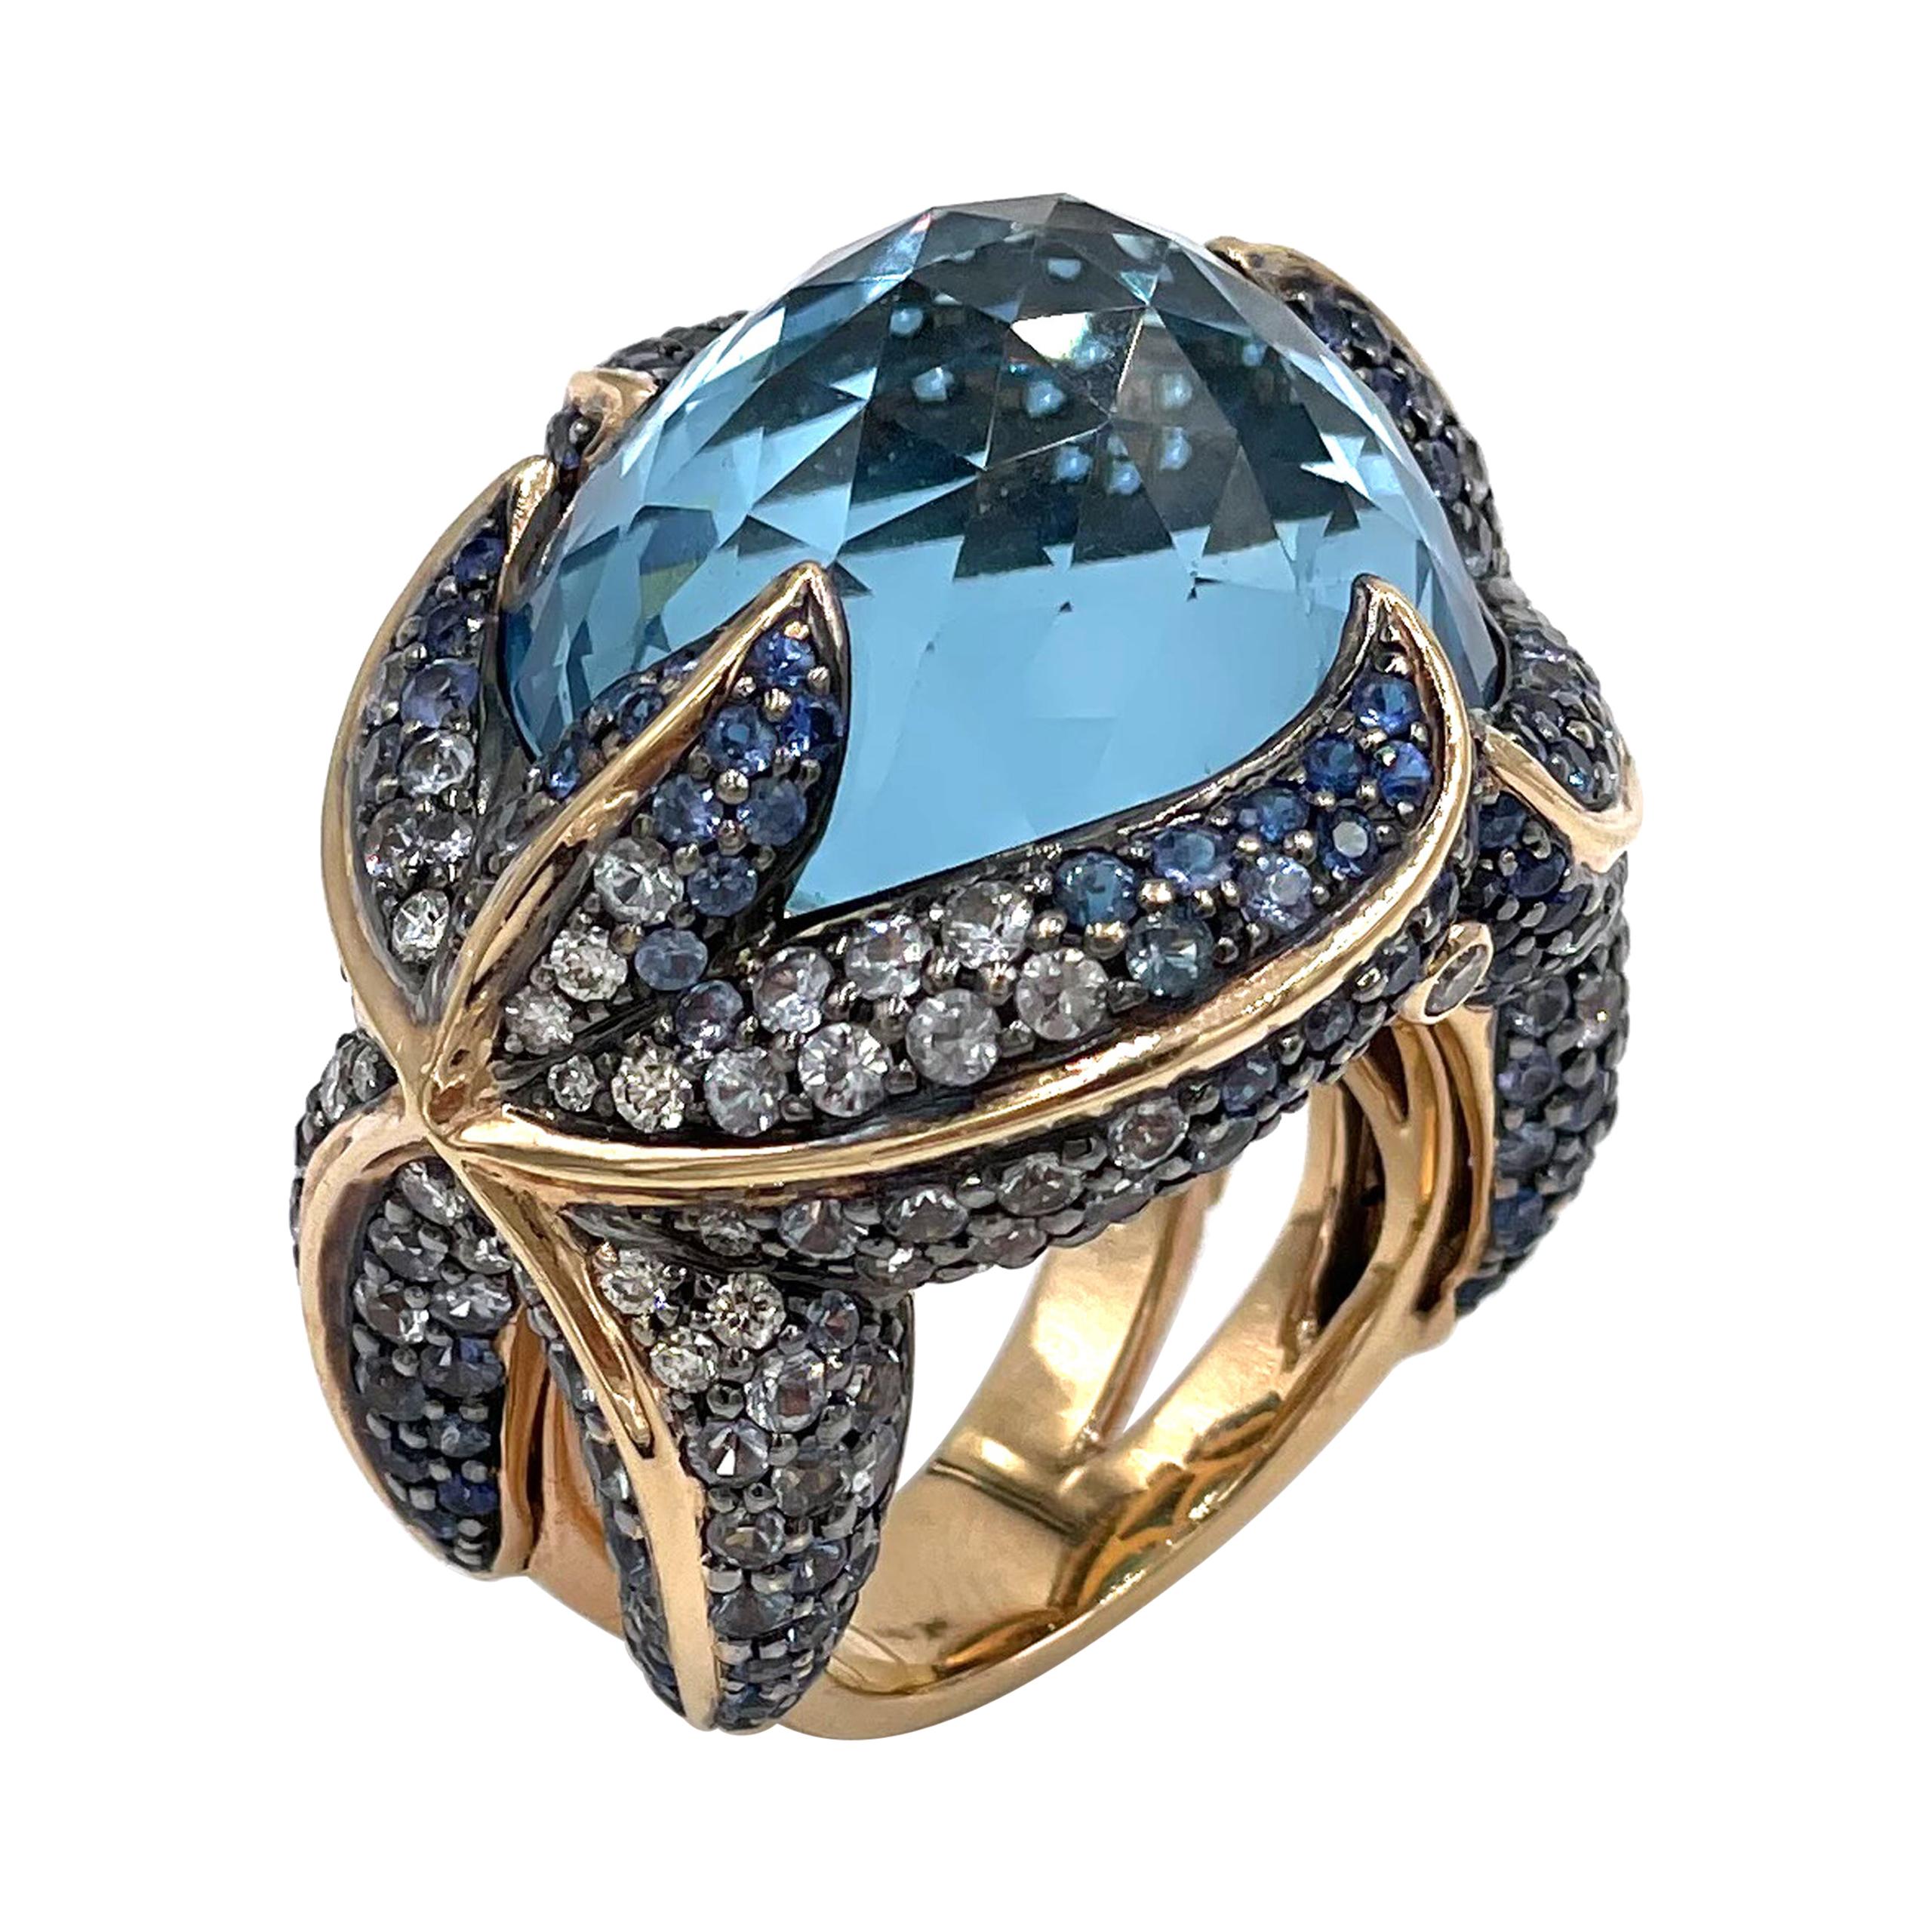 "Starfish" 18k Rose Gold and Blue Topaz Ring